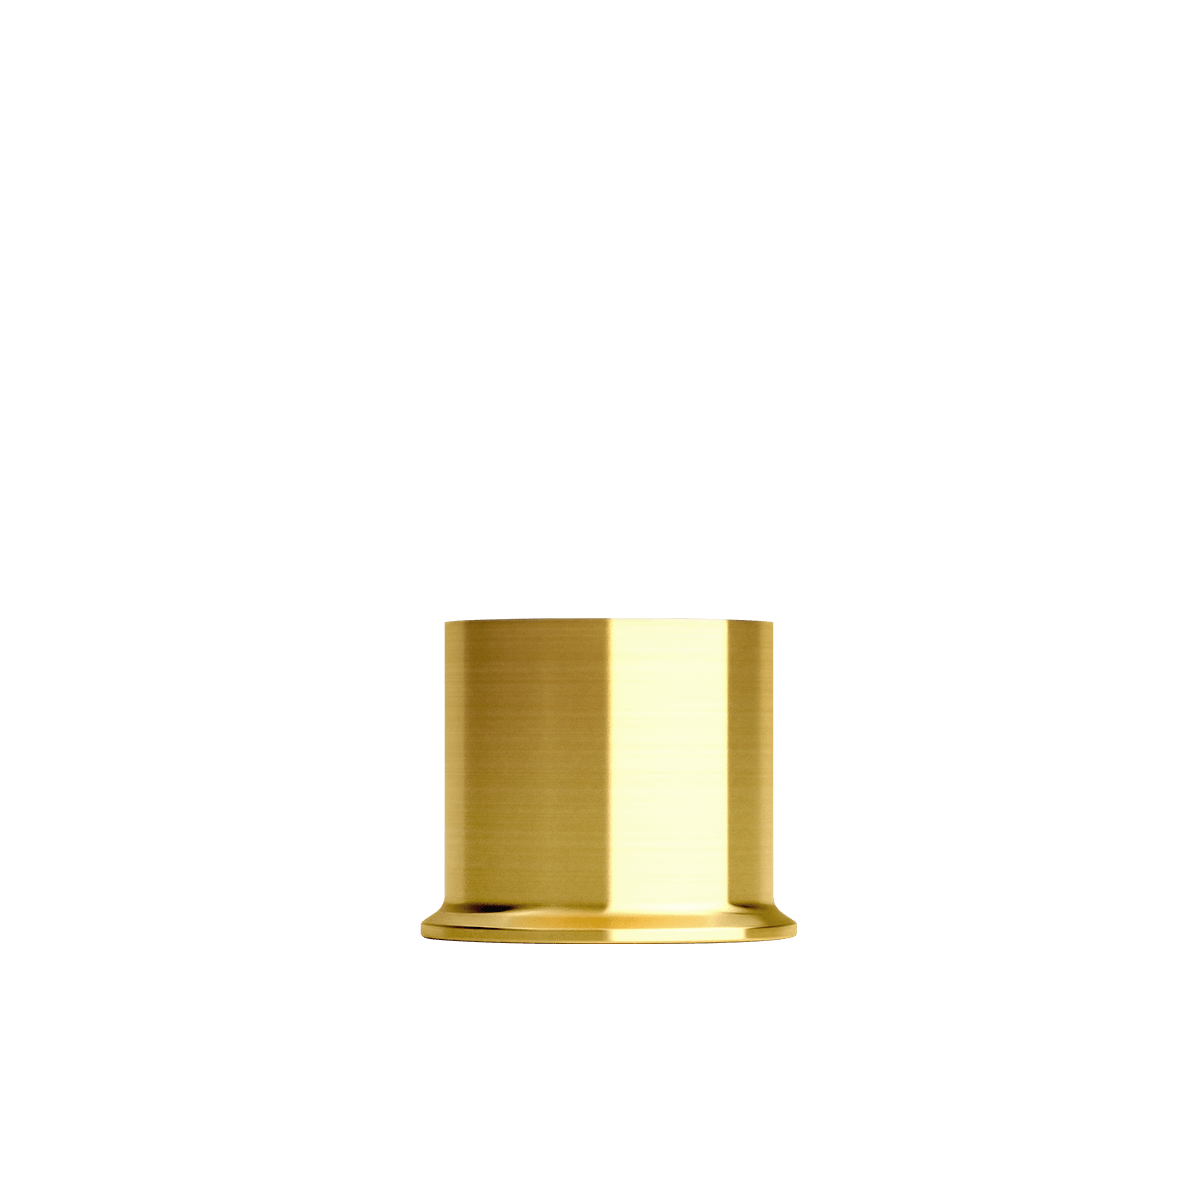 variant_600198% | Ambience - London base - Brass 5 | SACKit